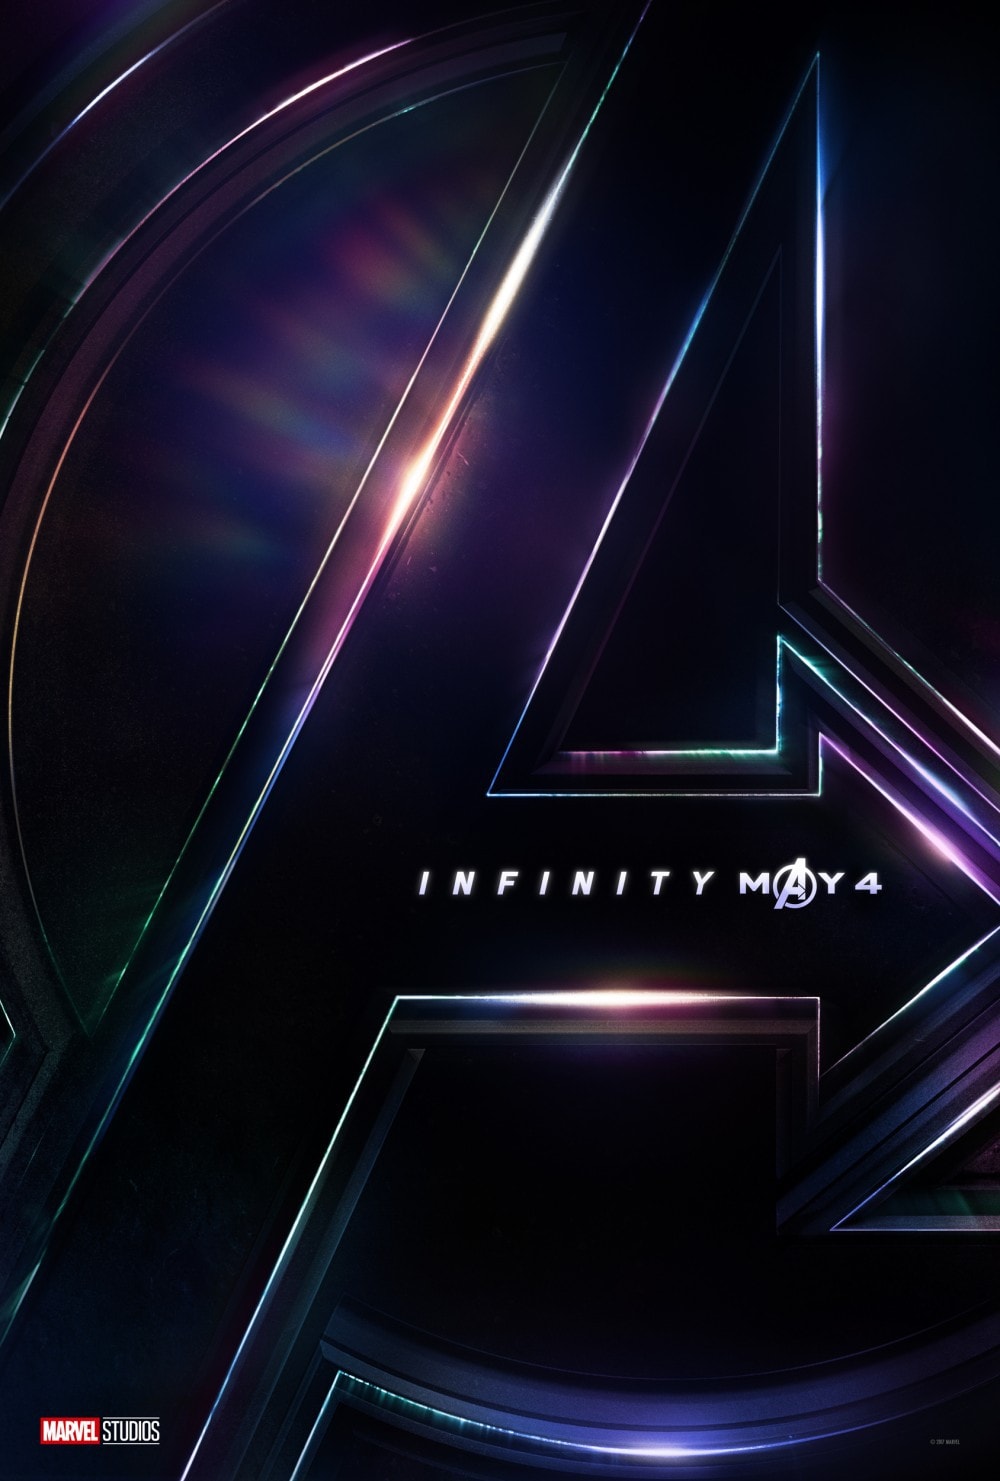 First Look Marvel Studios’ AVENGERS: INFINITY WAR Teaser Trailer and Poster